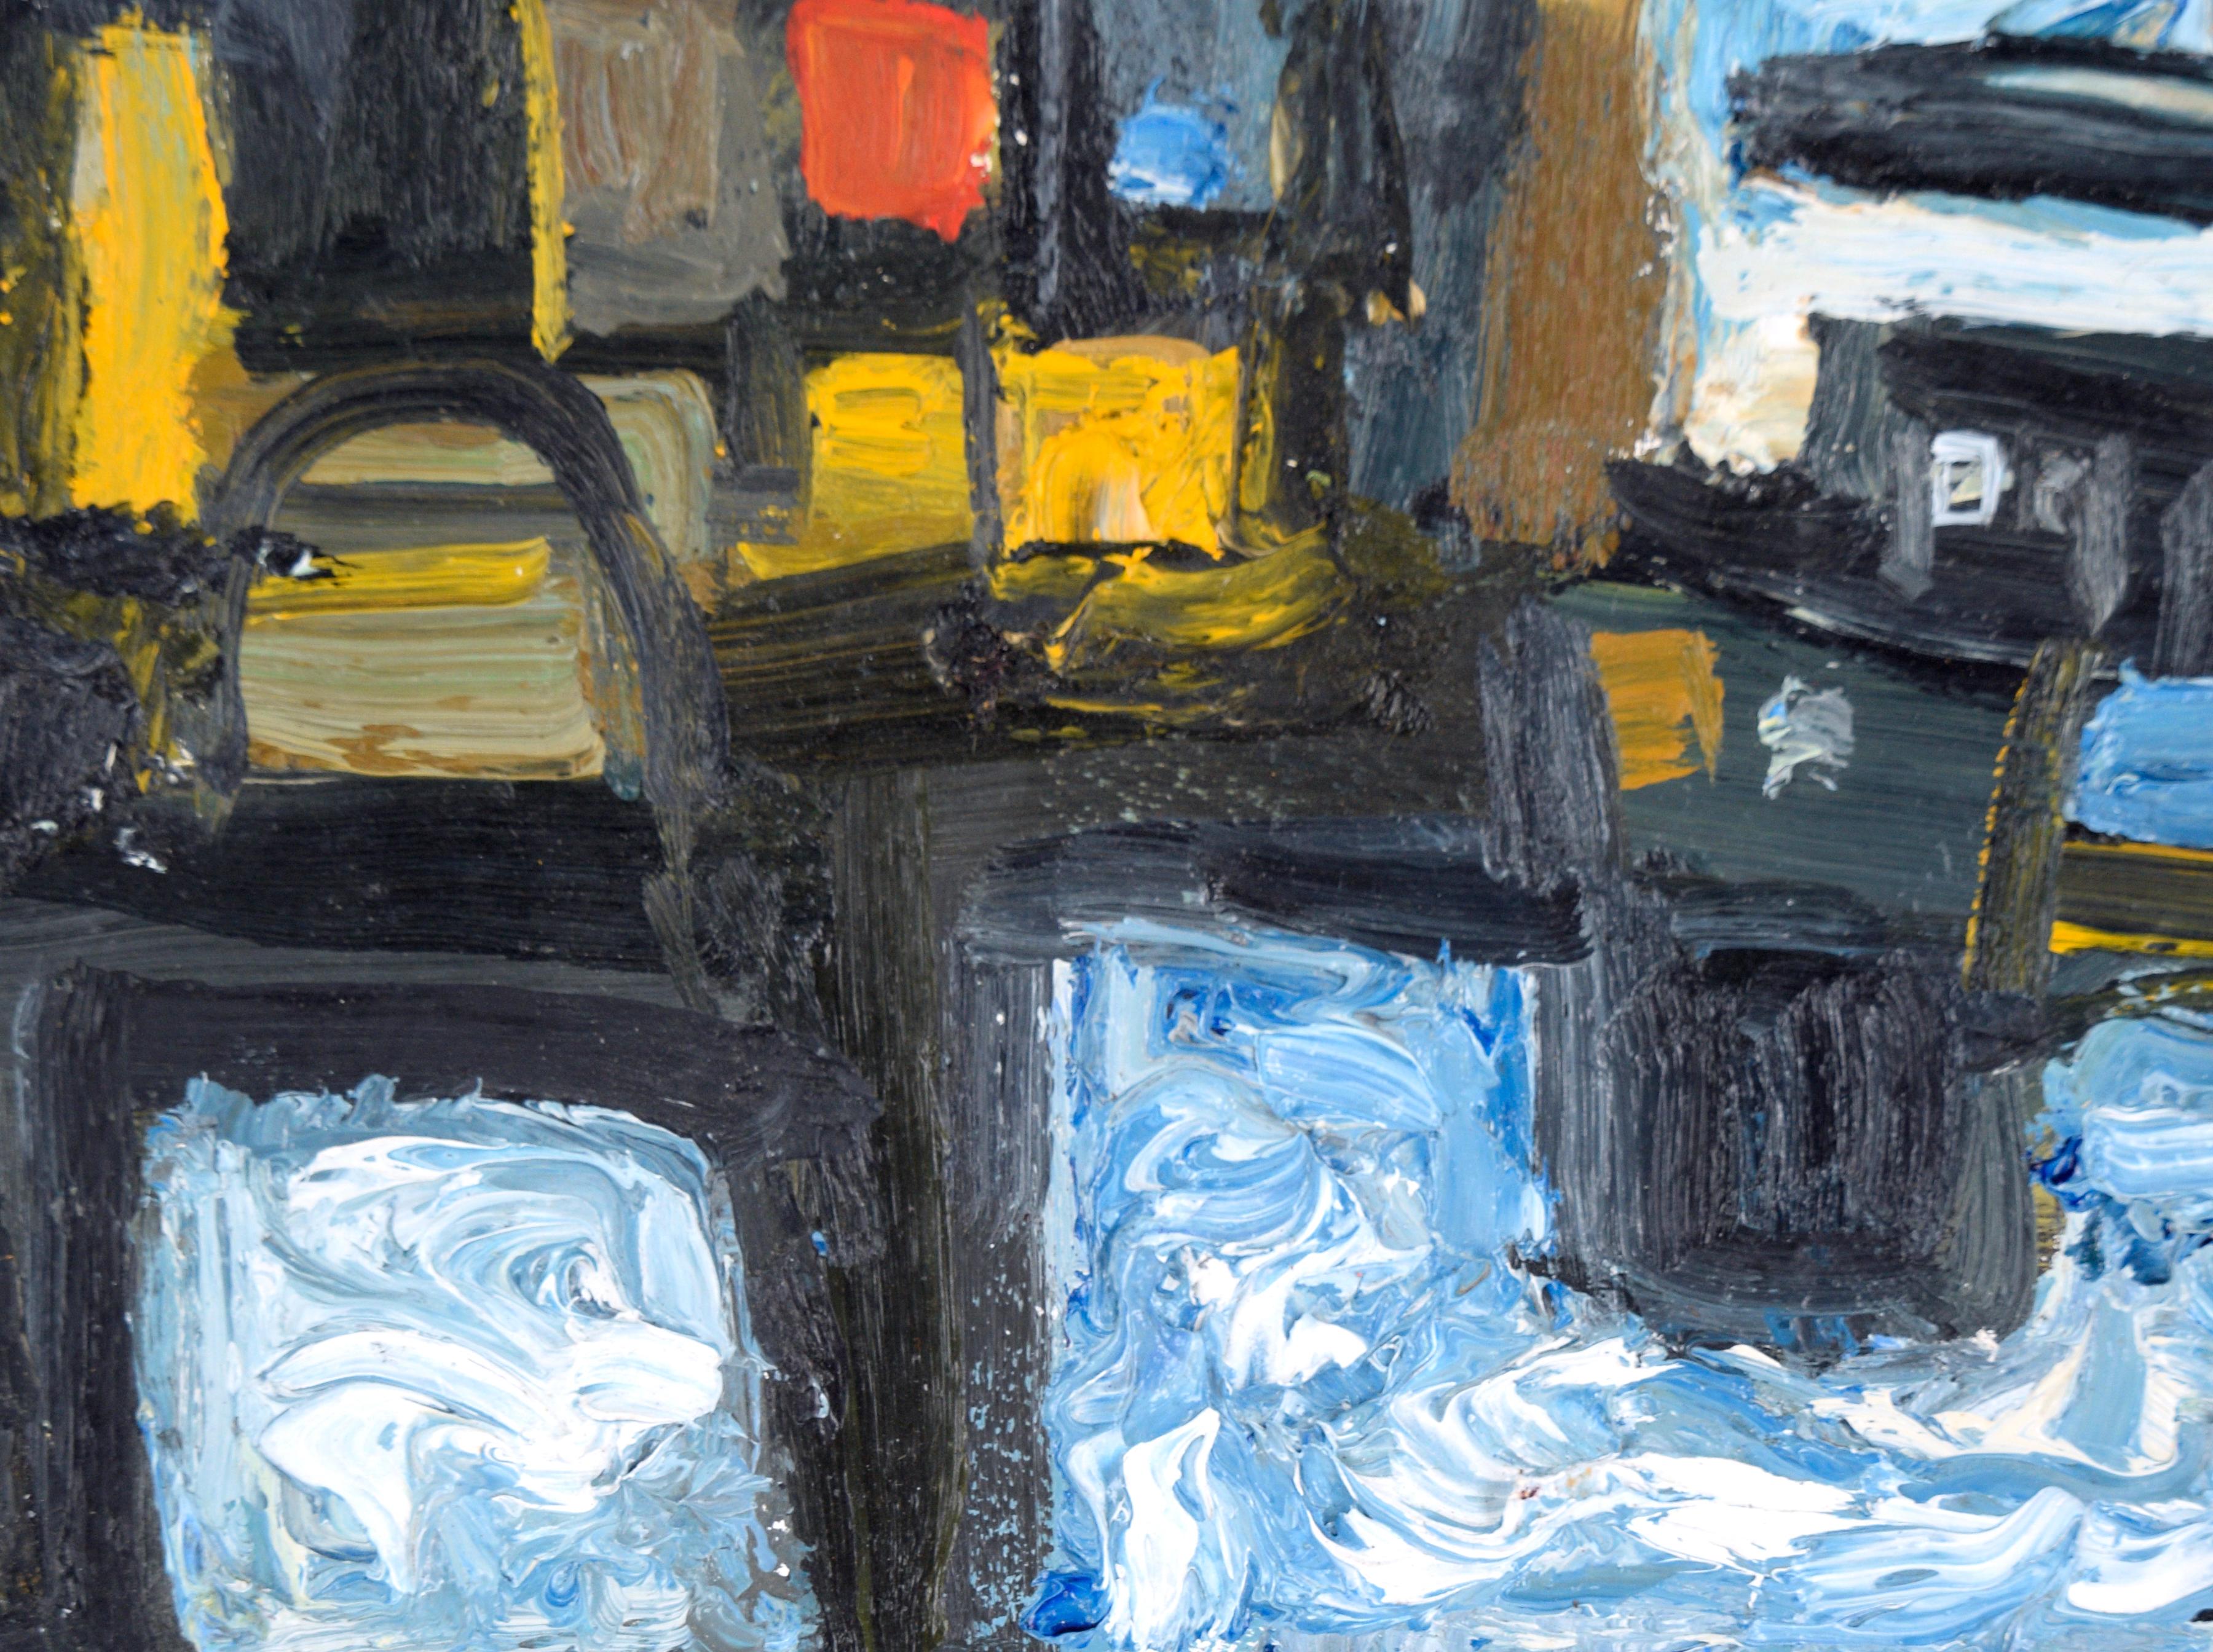 Abstract Surrealist Harbor Cityscape - Oil on Board - Post-Impressionist Painting by Jim Spitzer